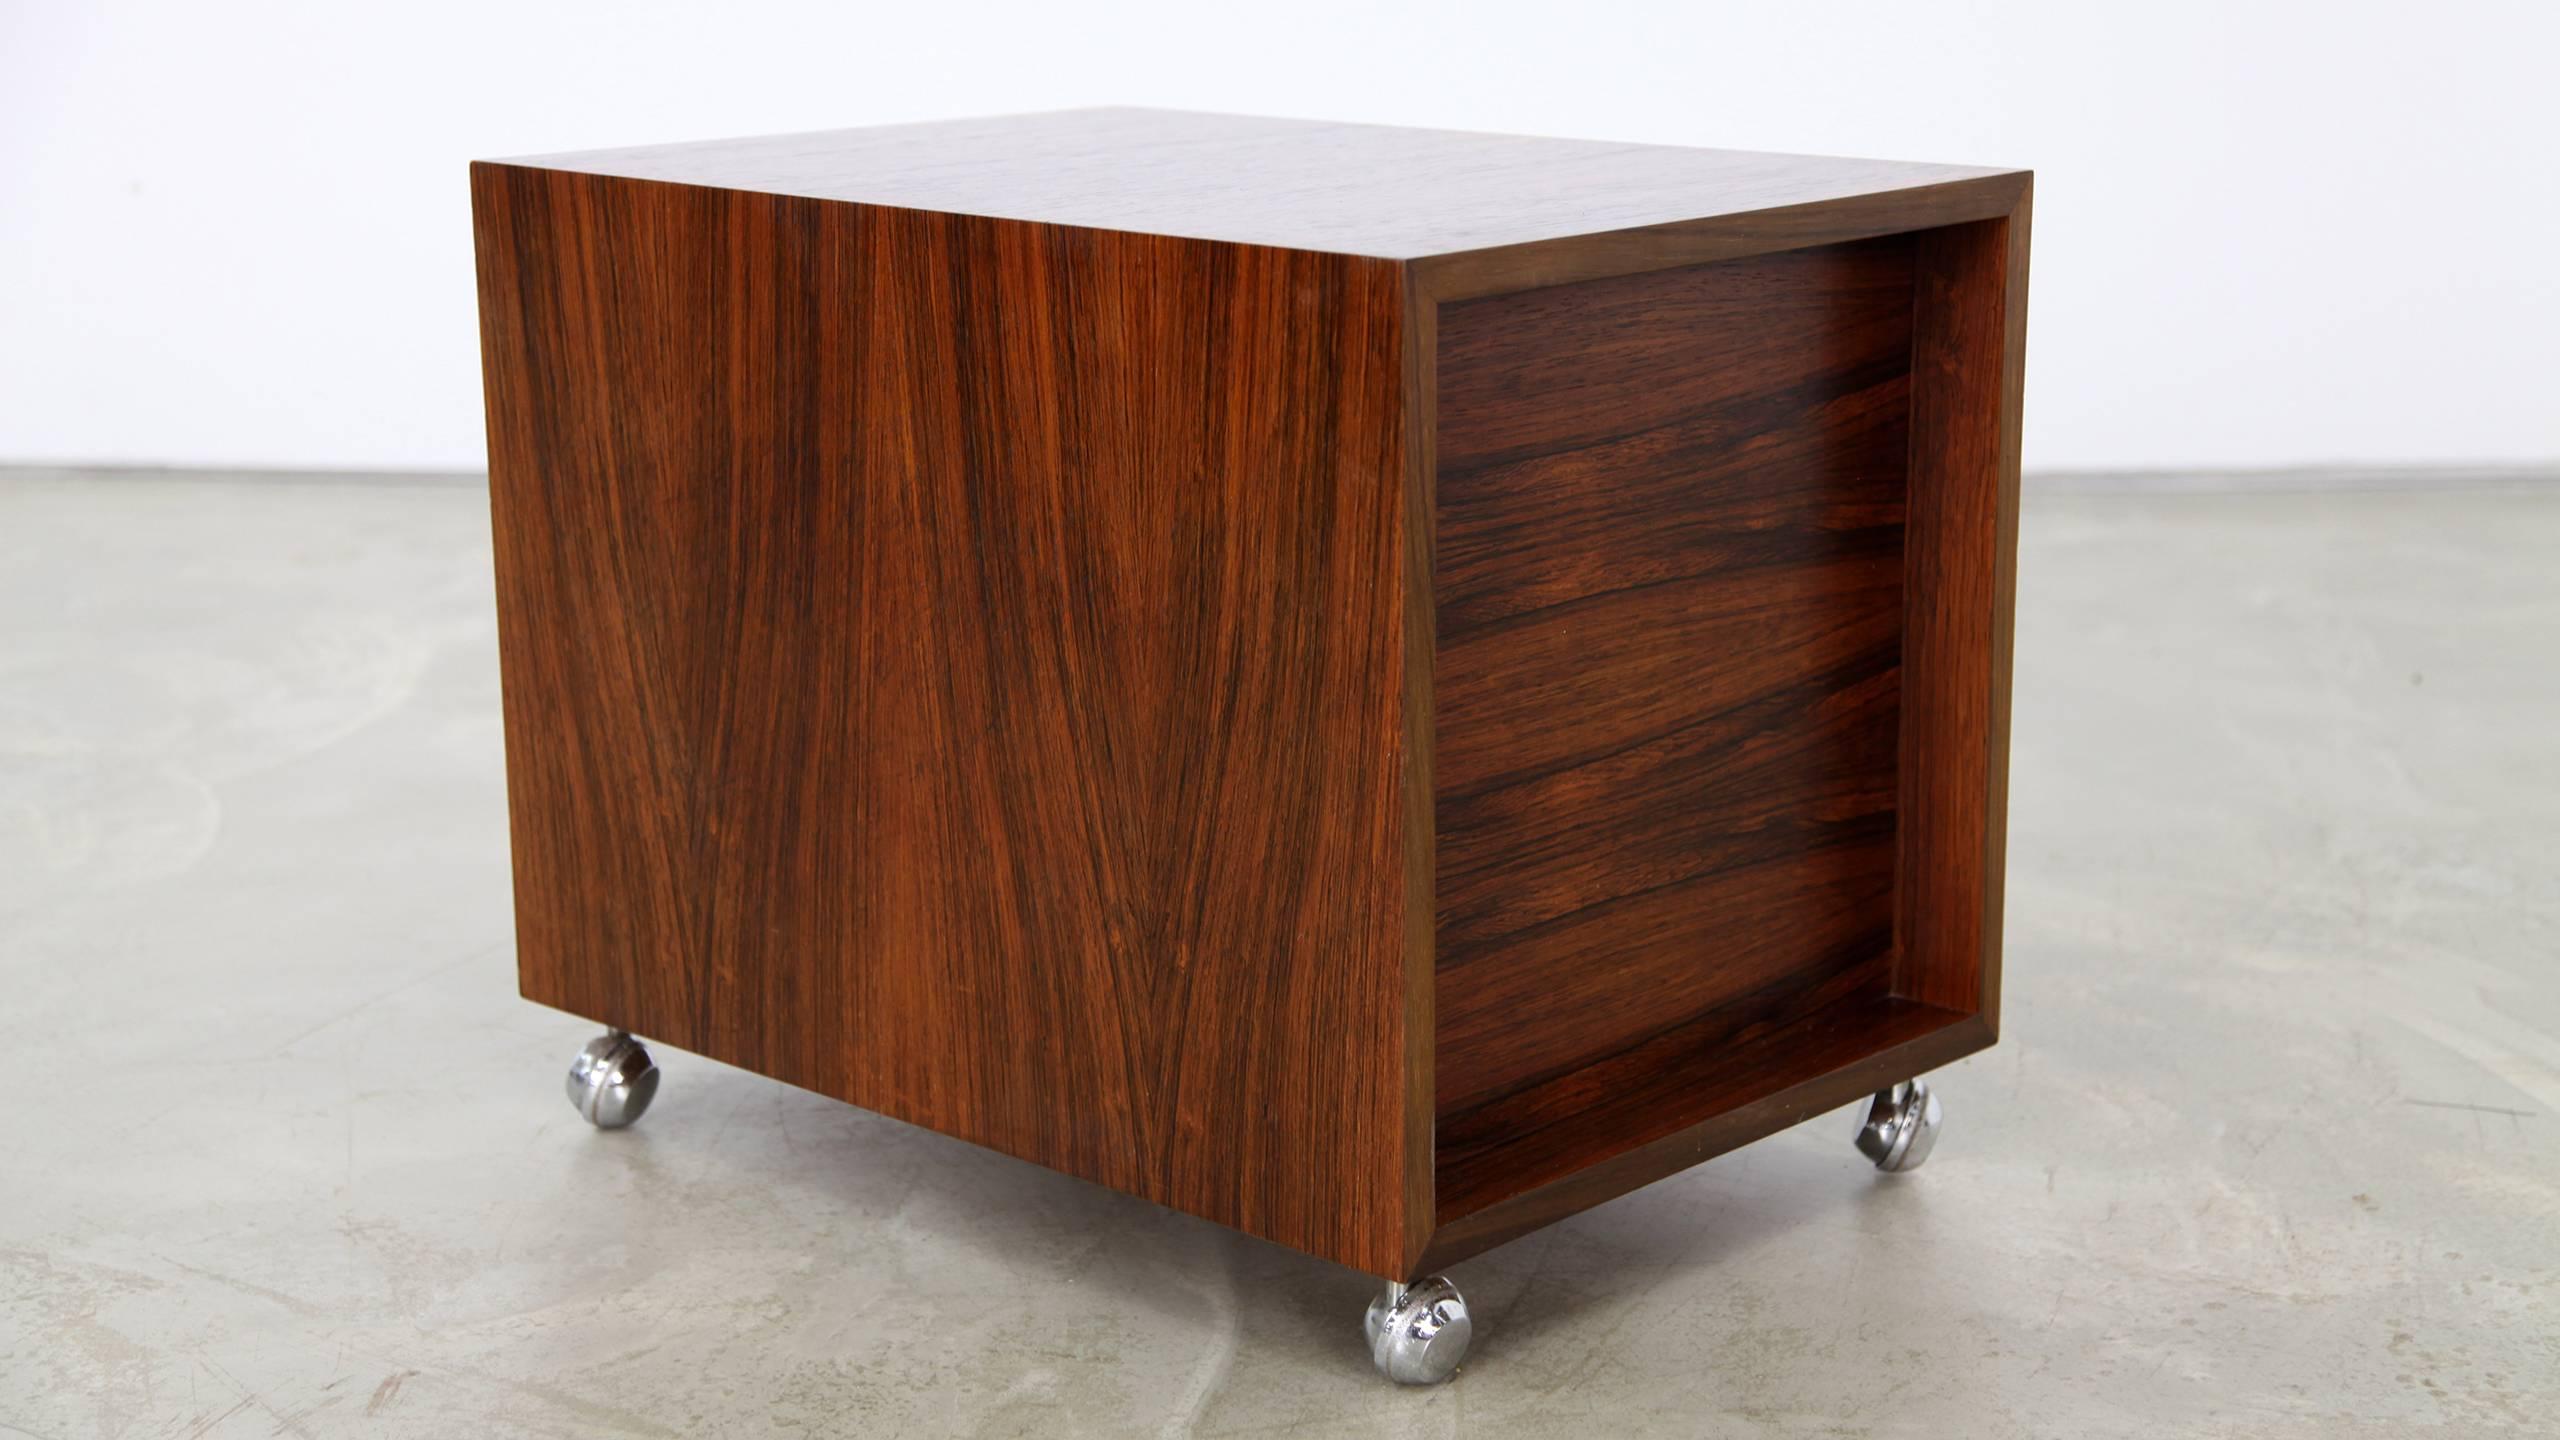 Wood Bodil Kjaer, rare Desk with Chest and Sideboard, Denmark, circa 1959